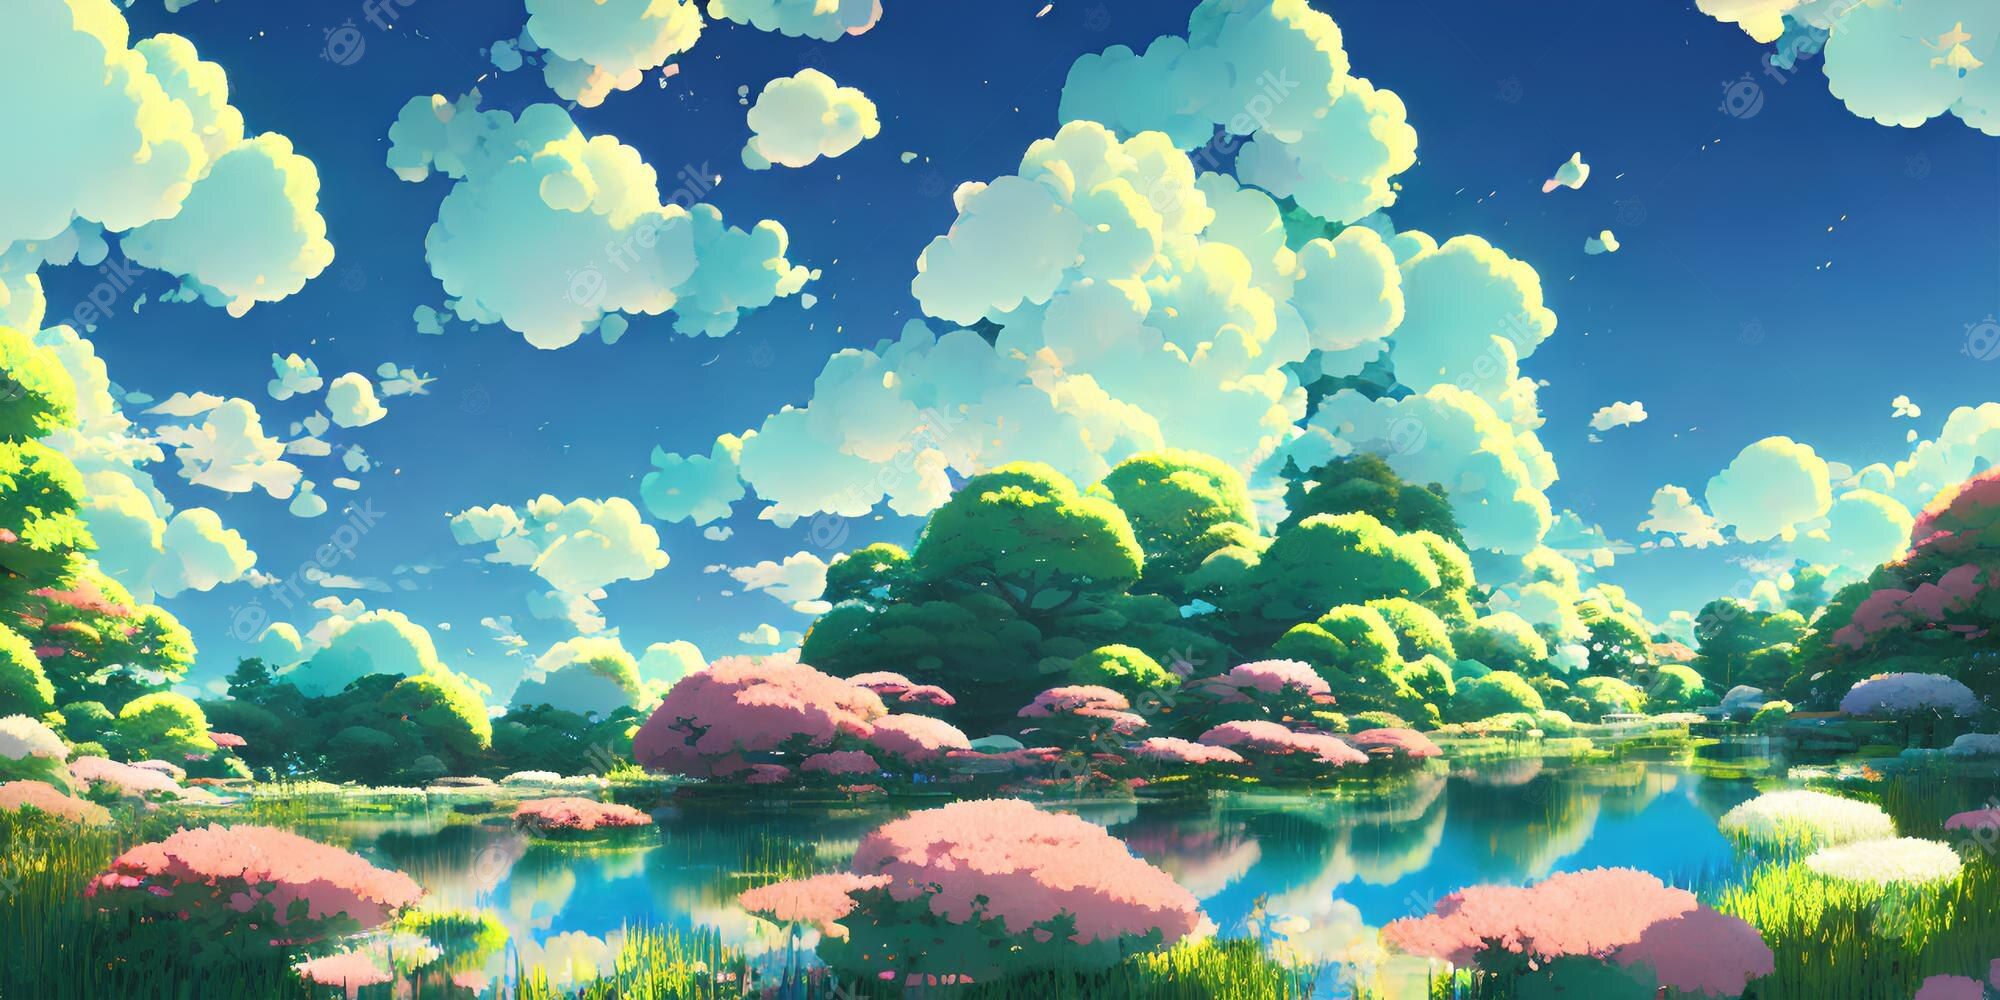 Digital painting of beautiful cherry blossom trees and sky background, illustration painting - Anime landscape